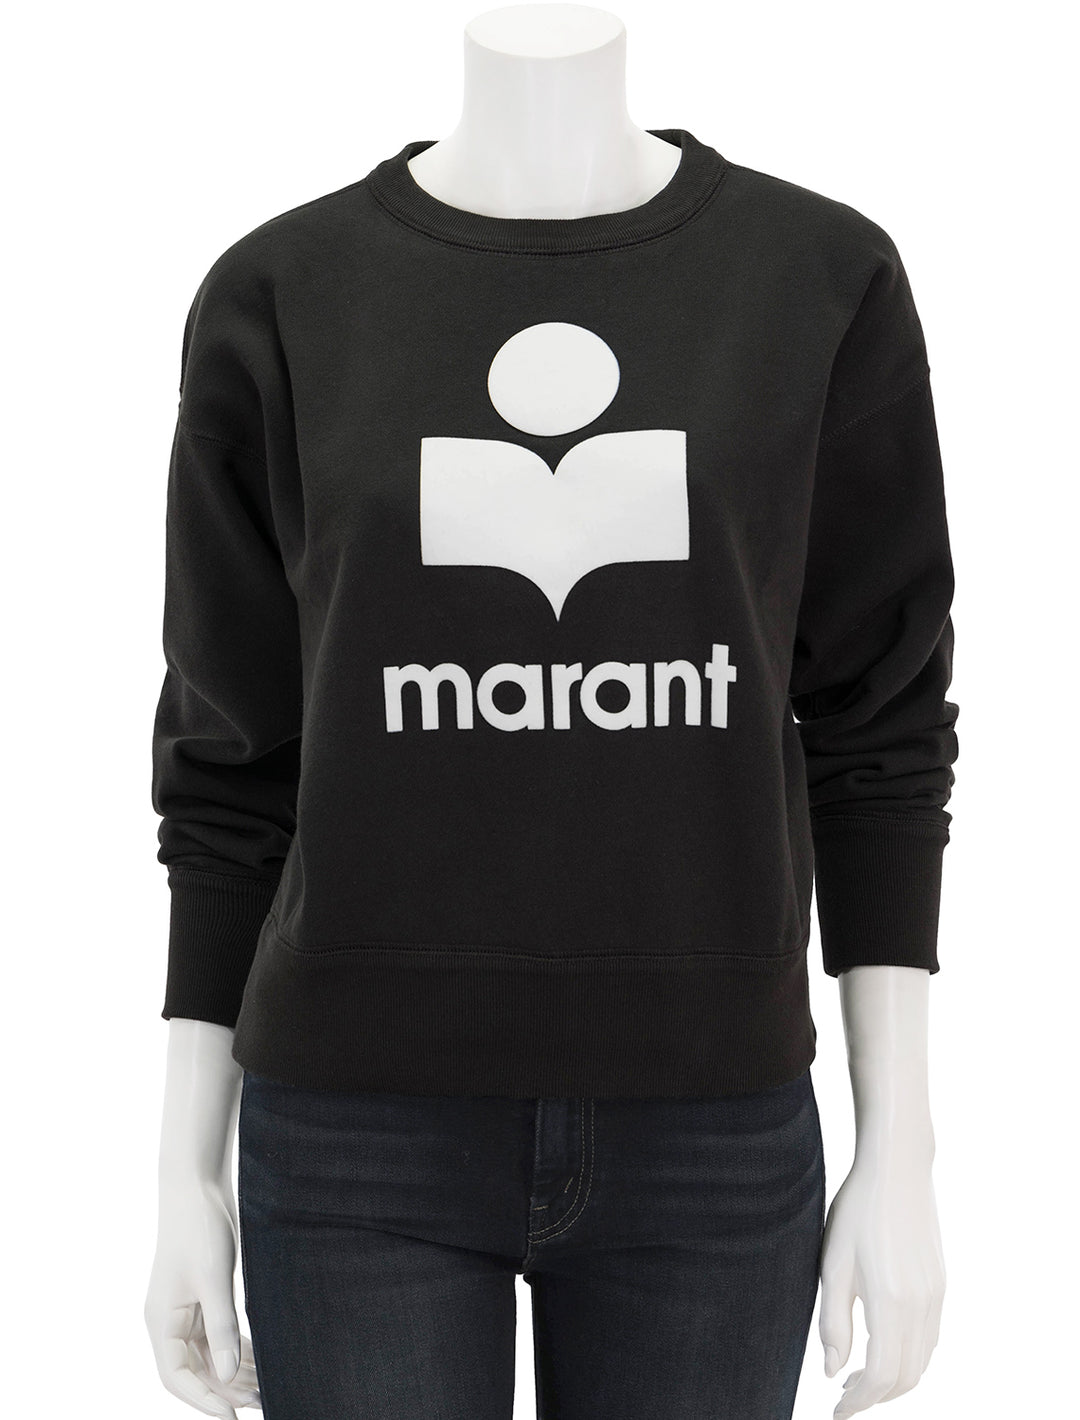 Front view of Isabel Marant Etoile's mobyli sweatshirt in faded black.